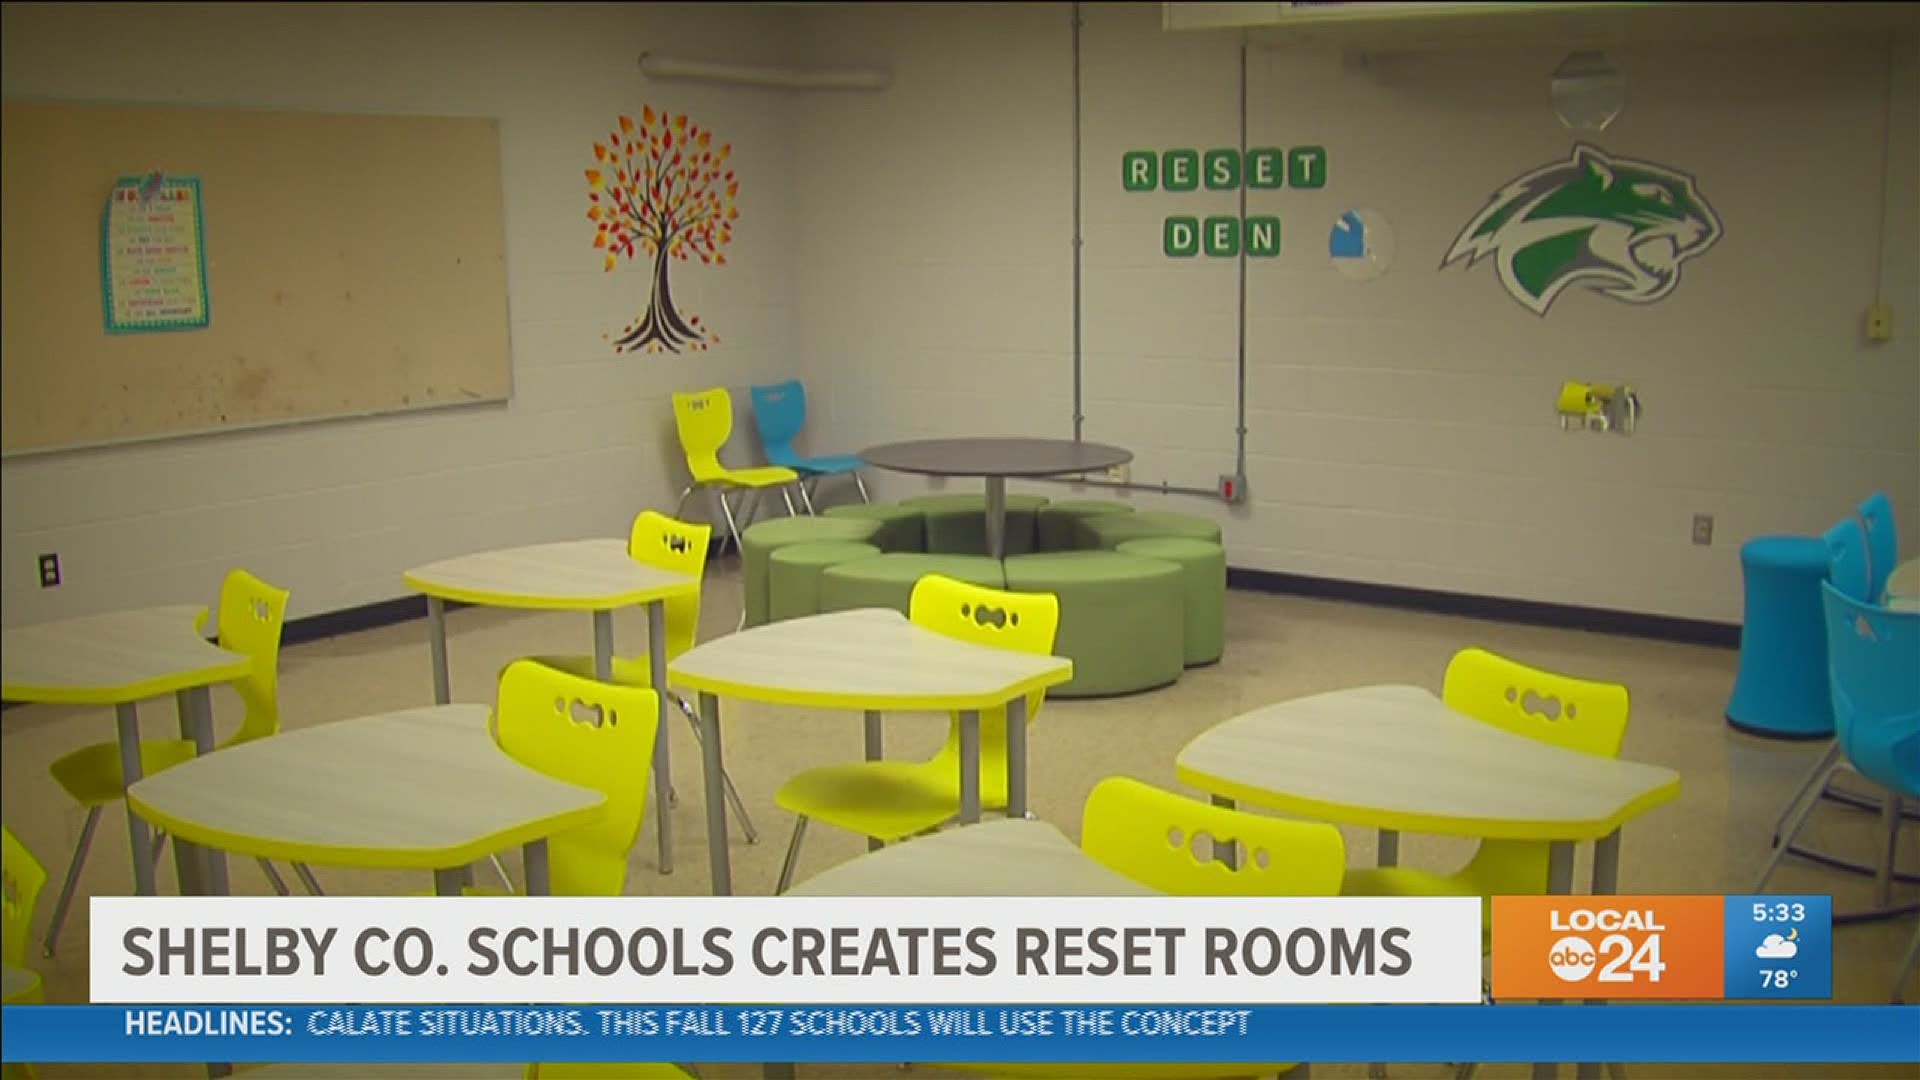 ReSET rooms are designated classrooms where students are sent to regroup after an outburst, behavior issue.